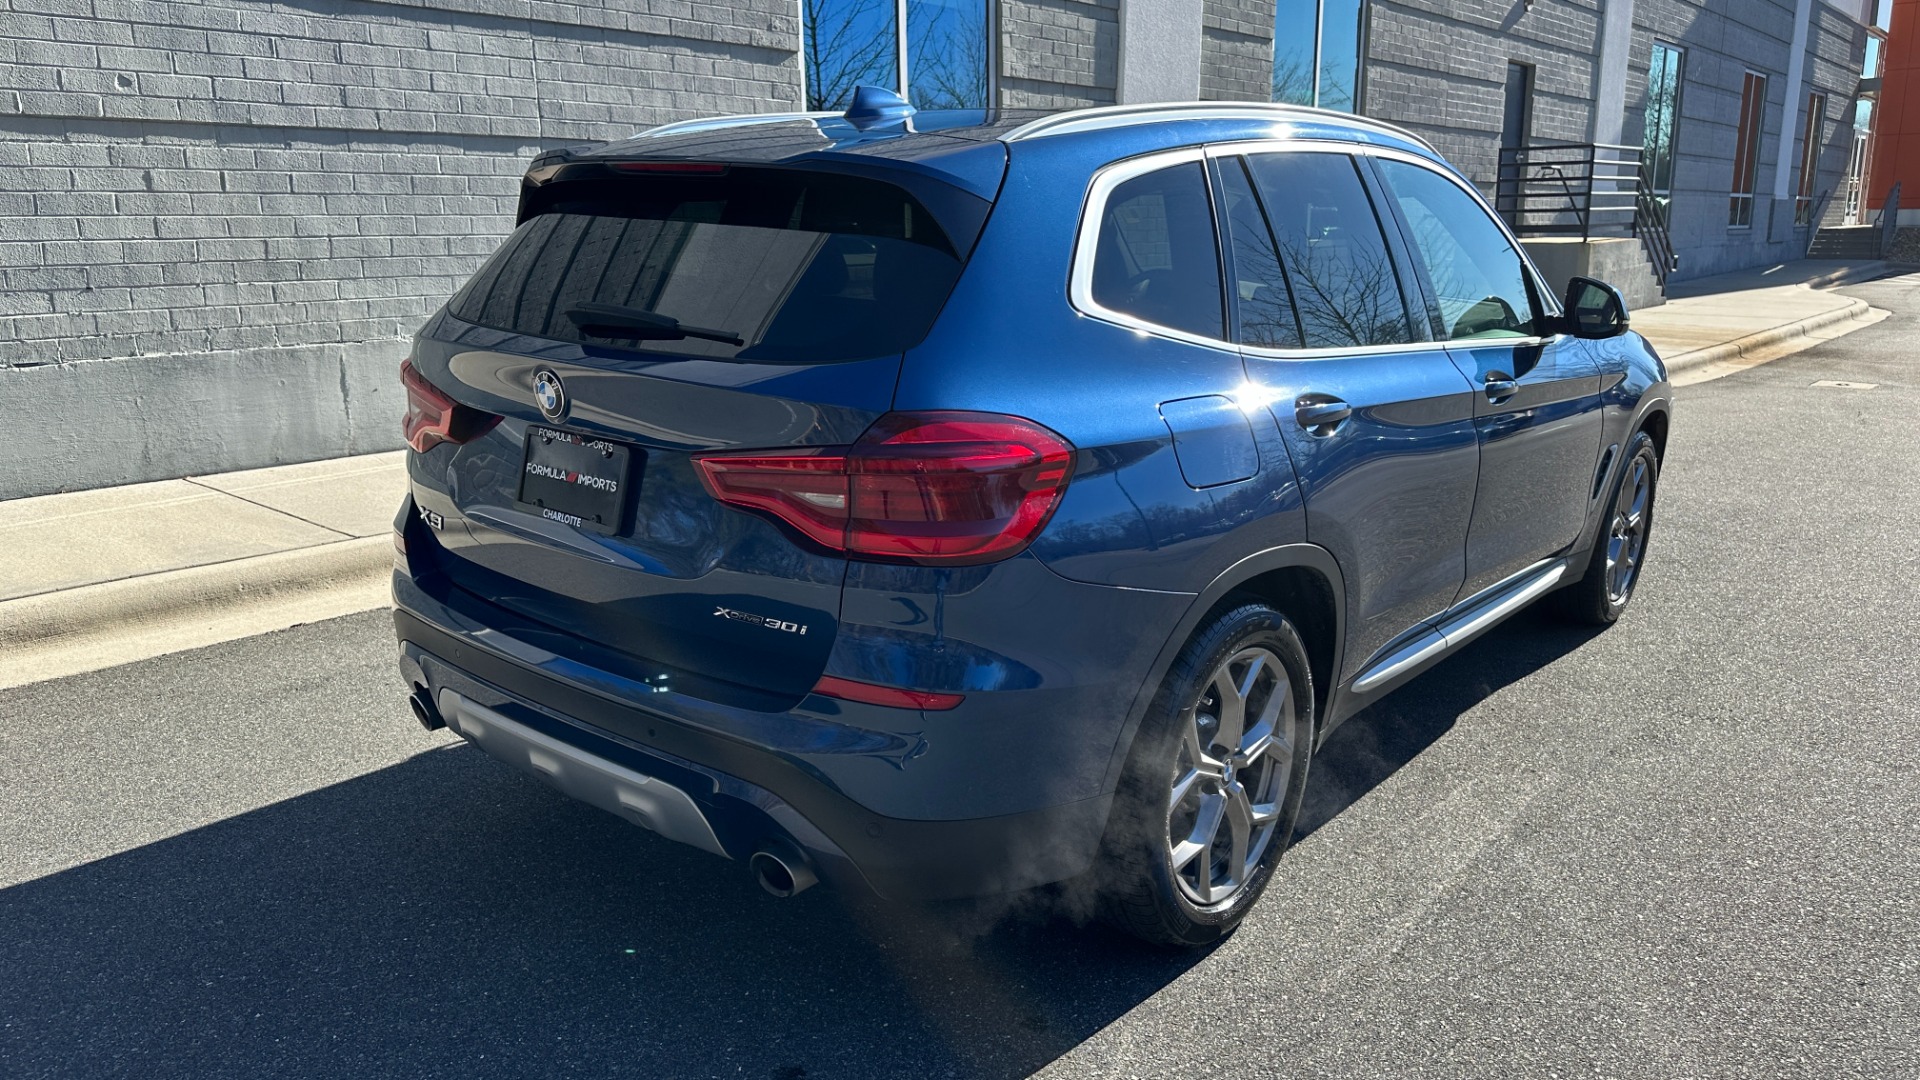 Used 2020 BMW X3 xDrive30i / DRIVER ASSISTANCE / HEATED SEATS / HEATED STEERING / NAV / COCK for sale $29,995 at Formula Imports in Charlotte NC 28227 4